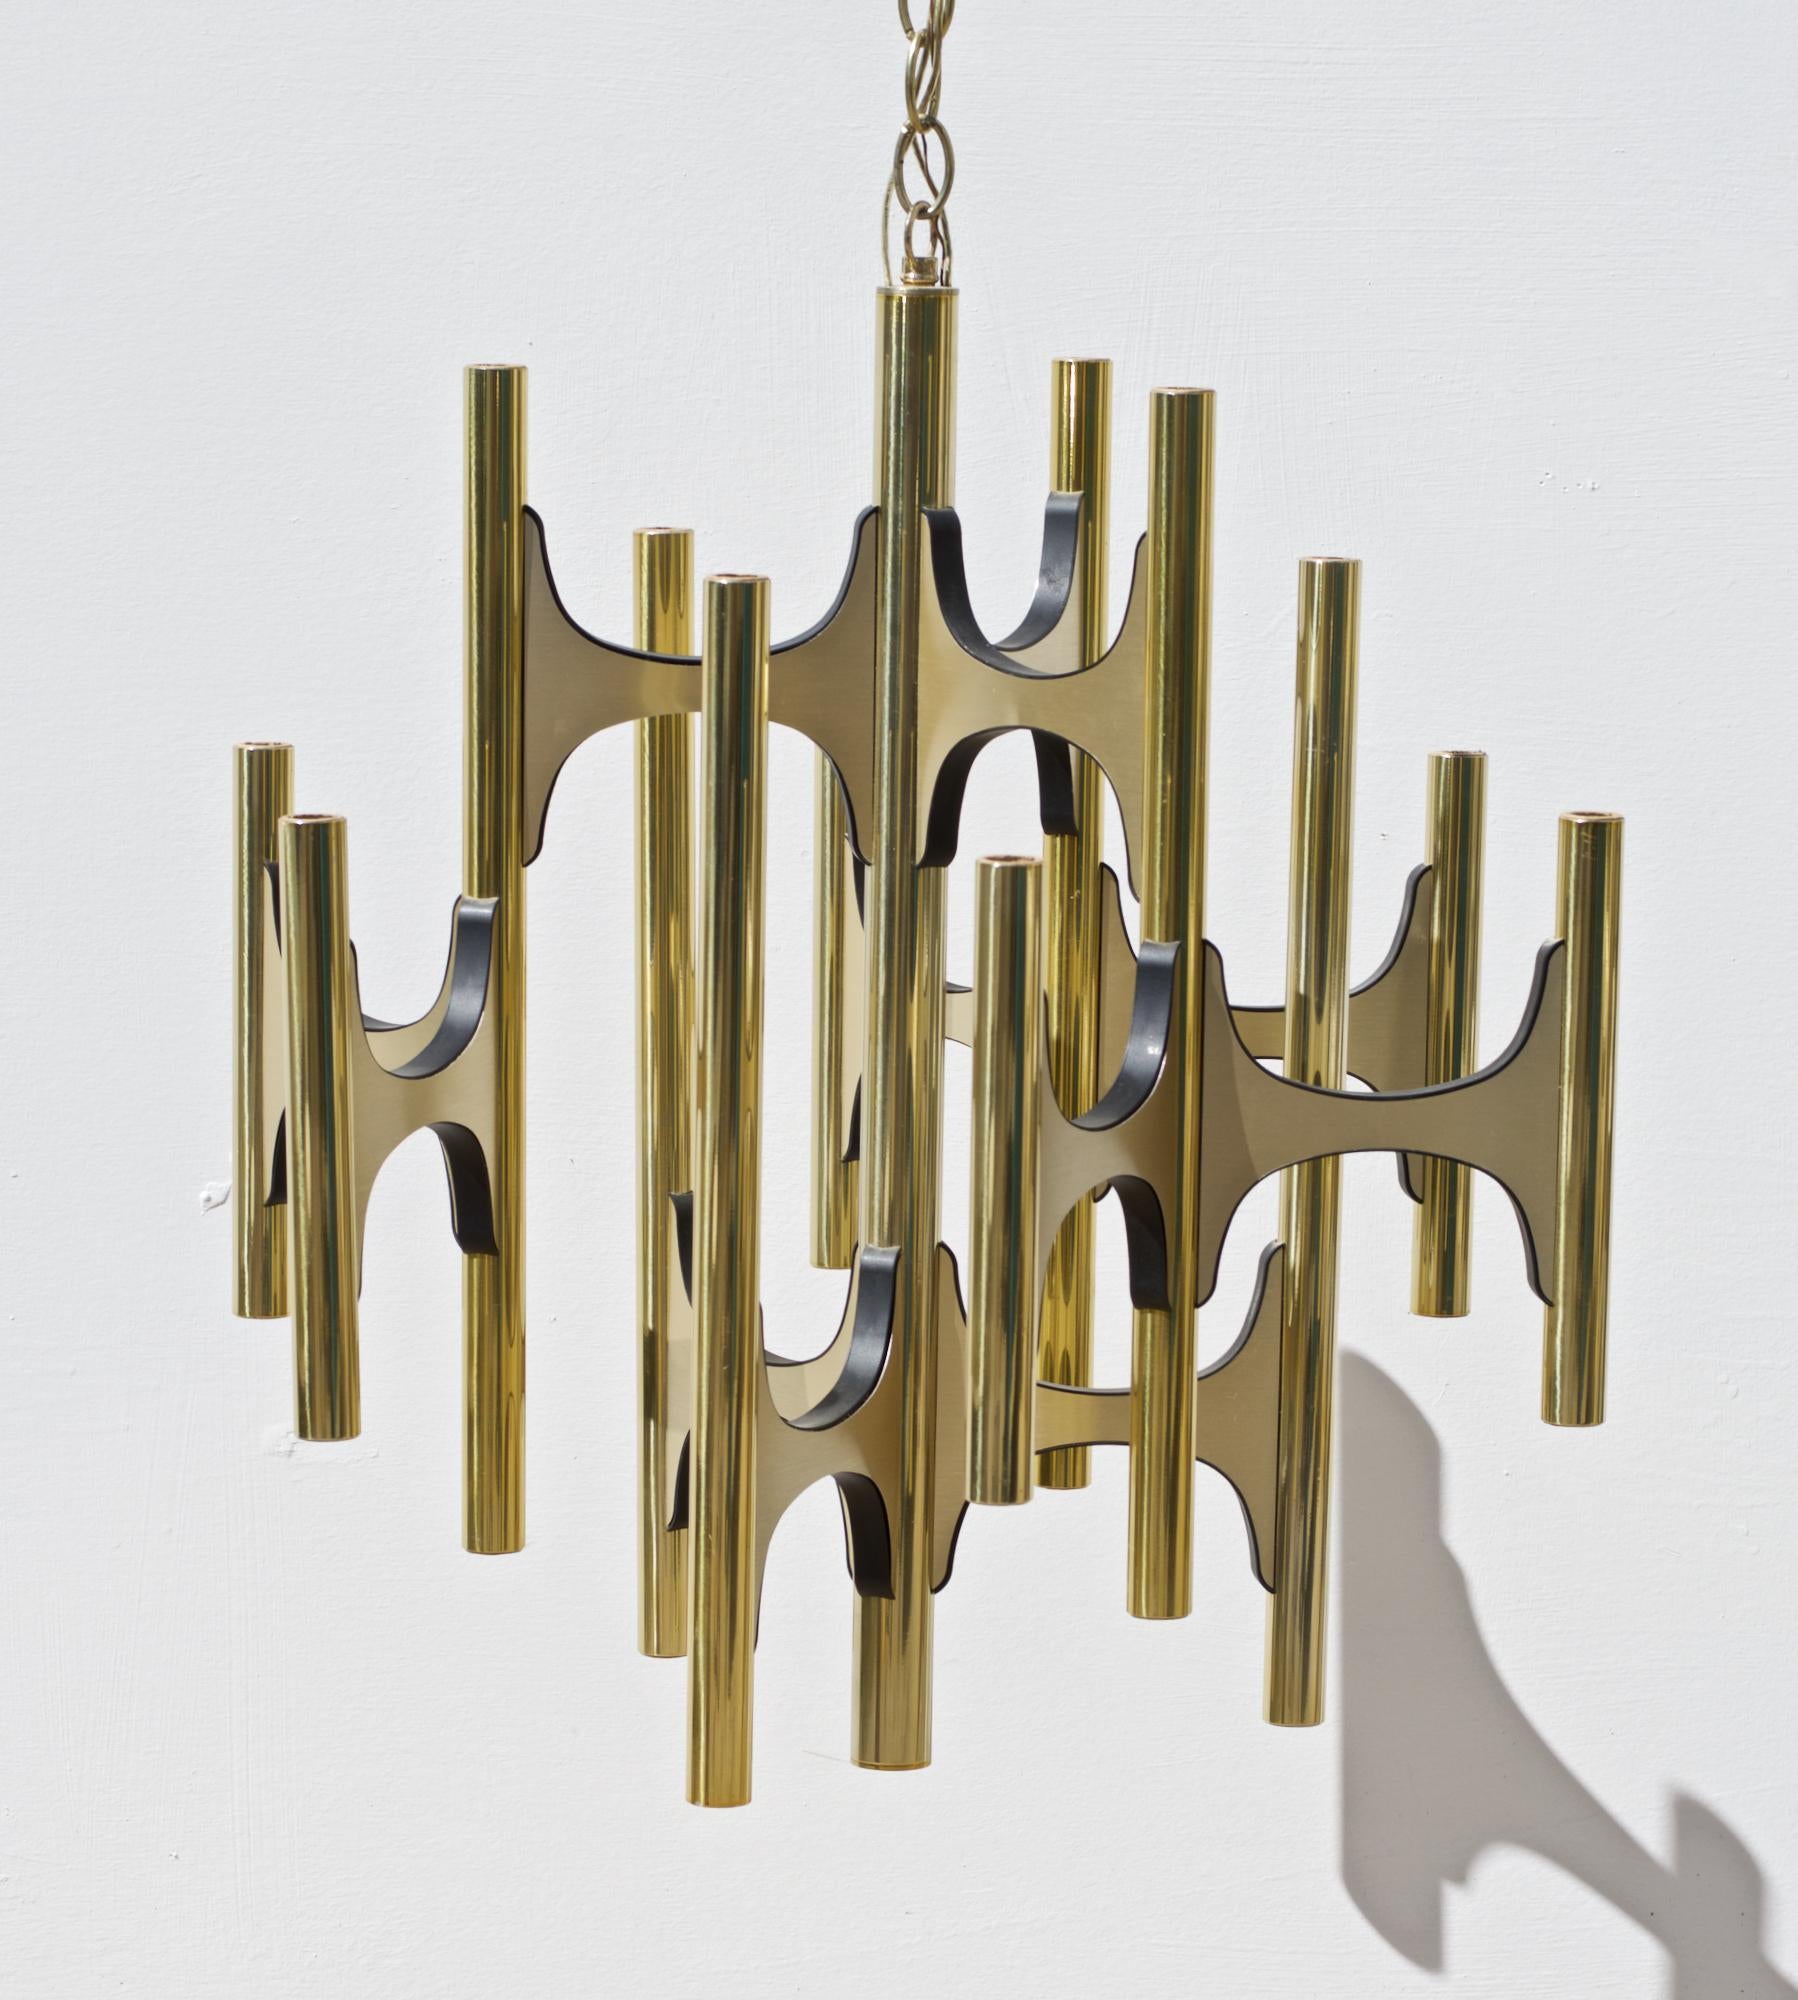 A striking modernist 24 light chandelier by Gaetano Scloari for Lightolier. The smaller scale hanging fixture can be used to dramatic effect in a wide range of places.
More pics of the fixture illuminated soon as we are waiting on a backordered